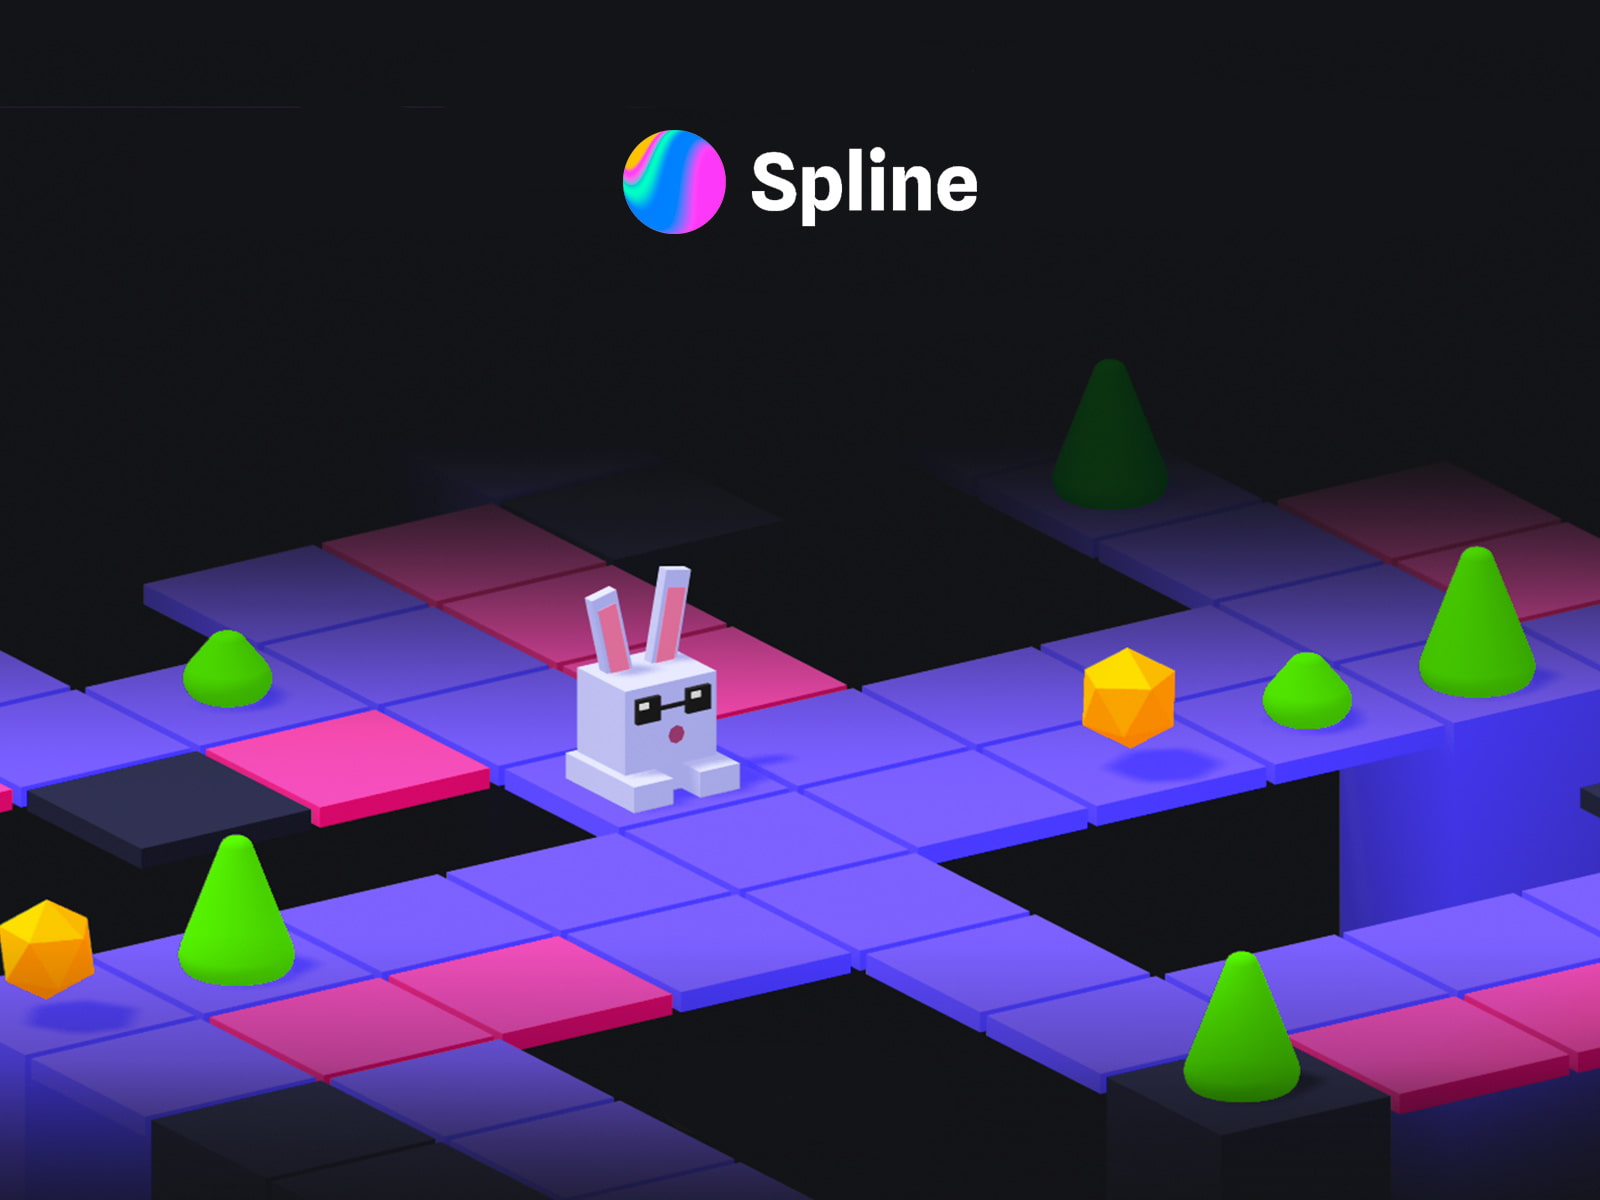 Spline - 3D Design Tool in the Browser with AI Features